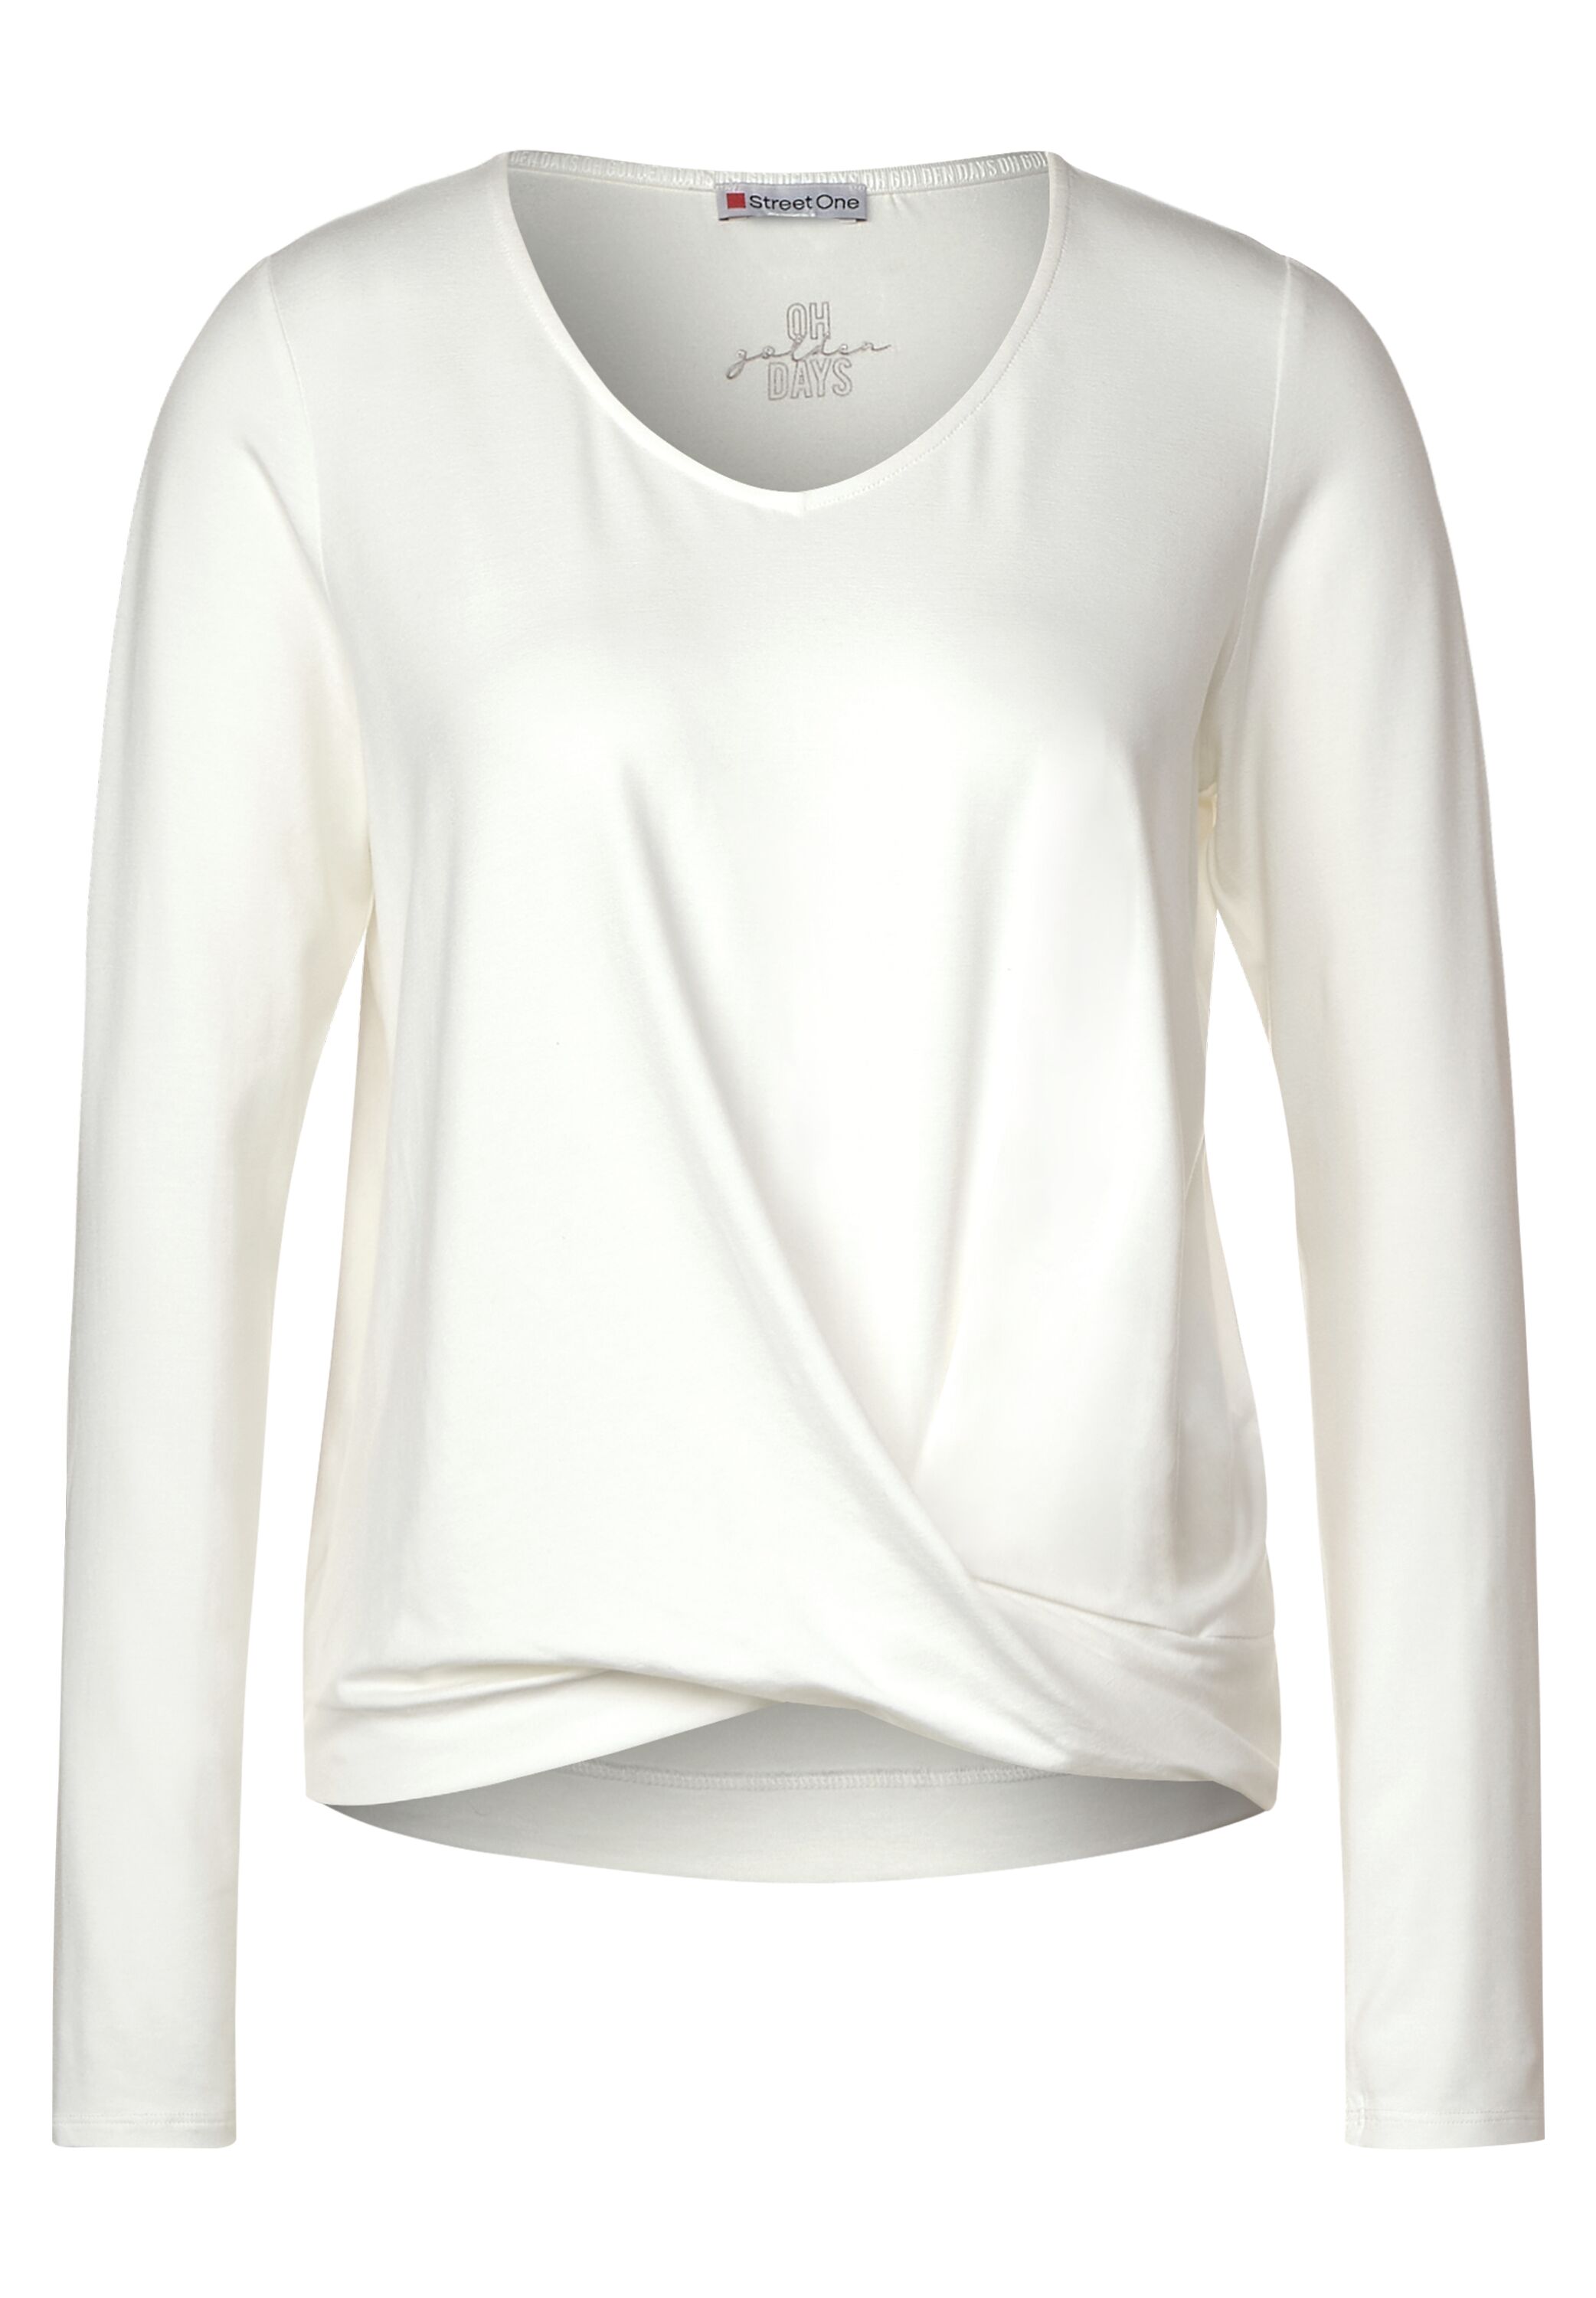 Street Mode Off in A315493-10108 - White One CONCEPT Shirt